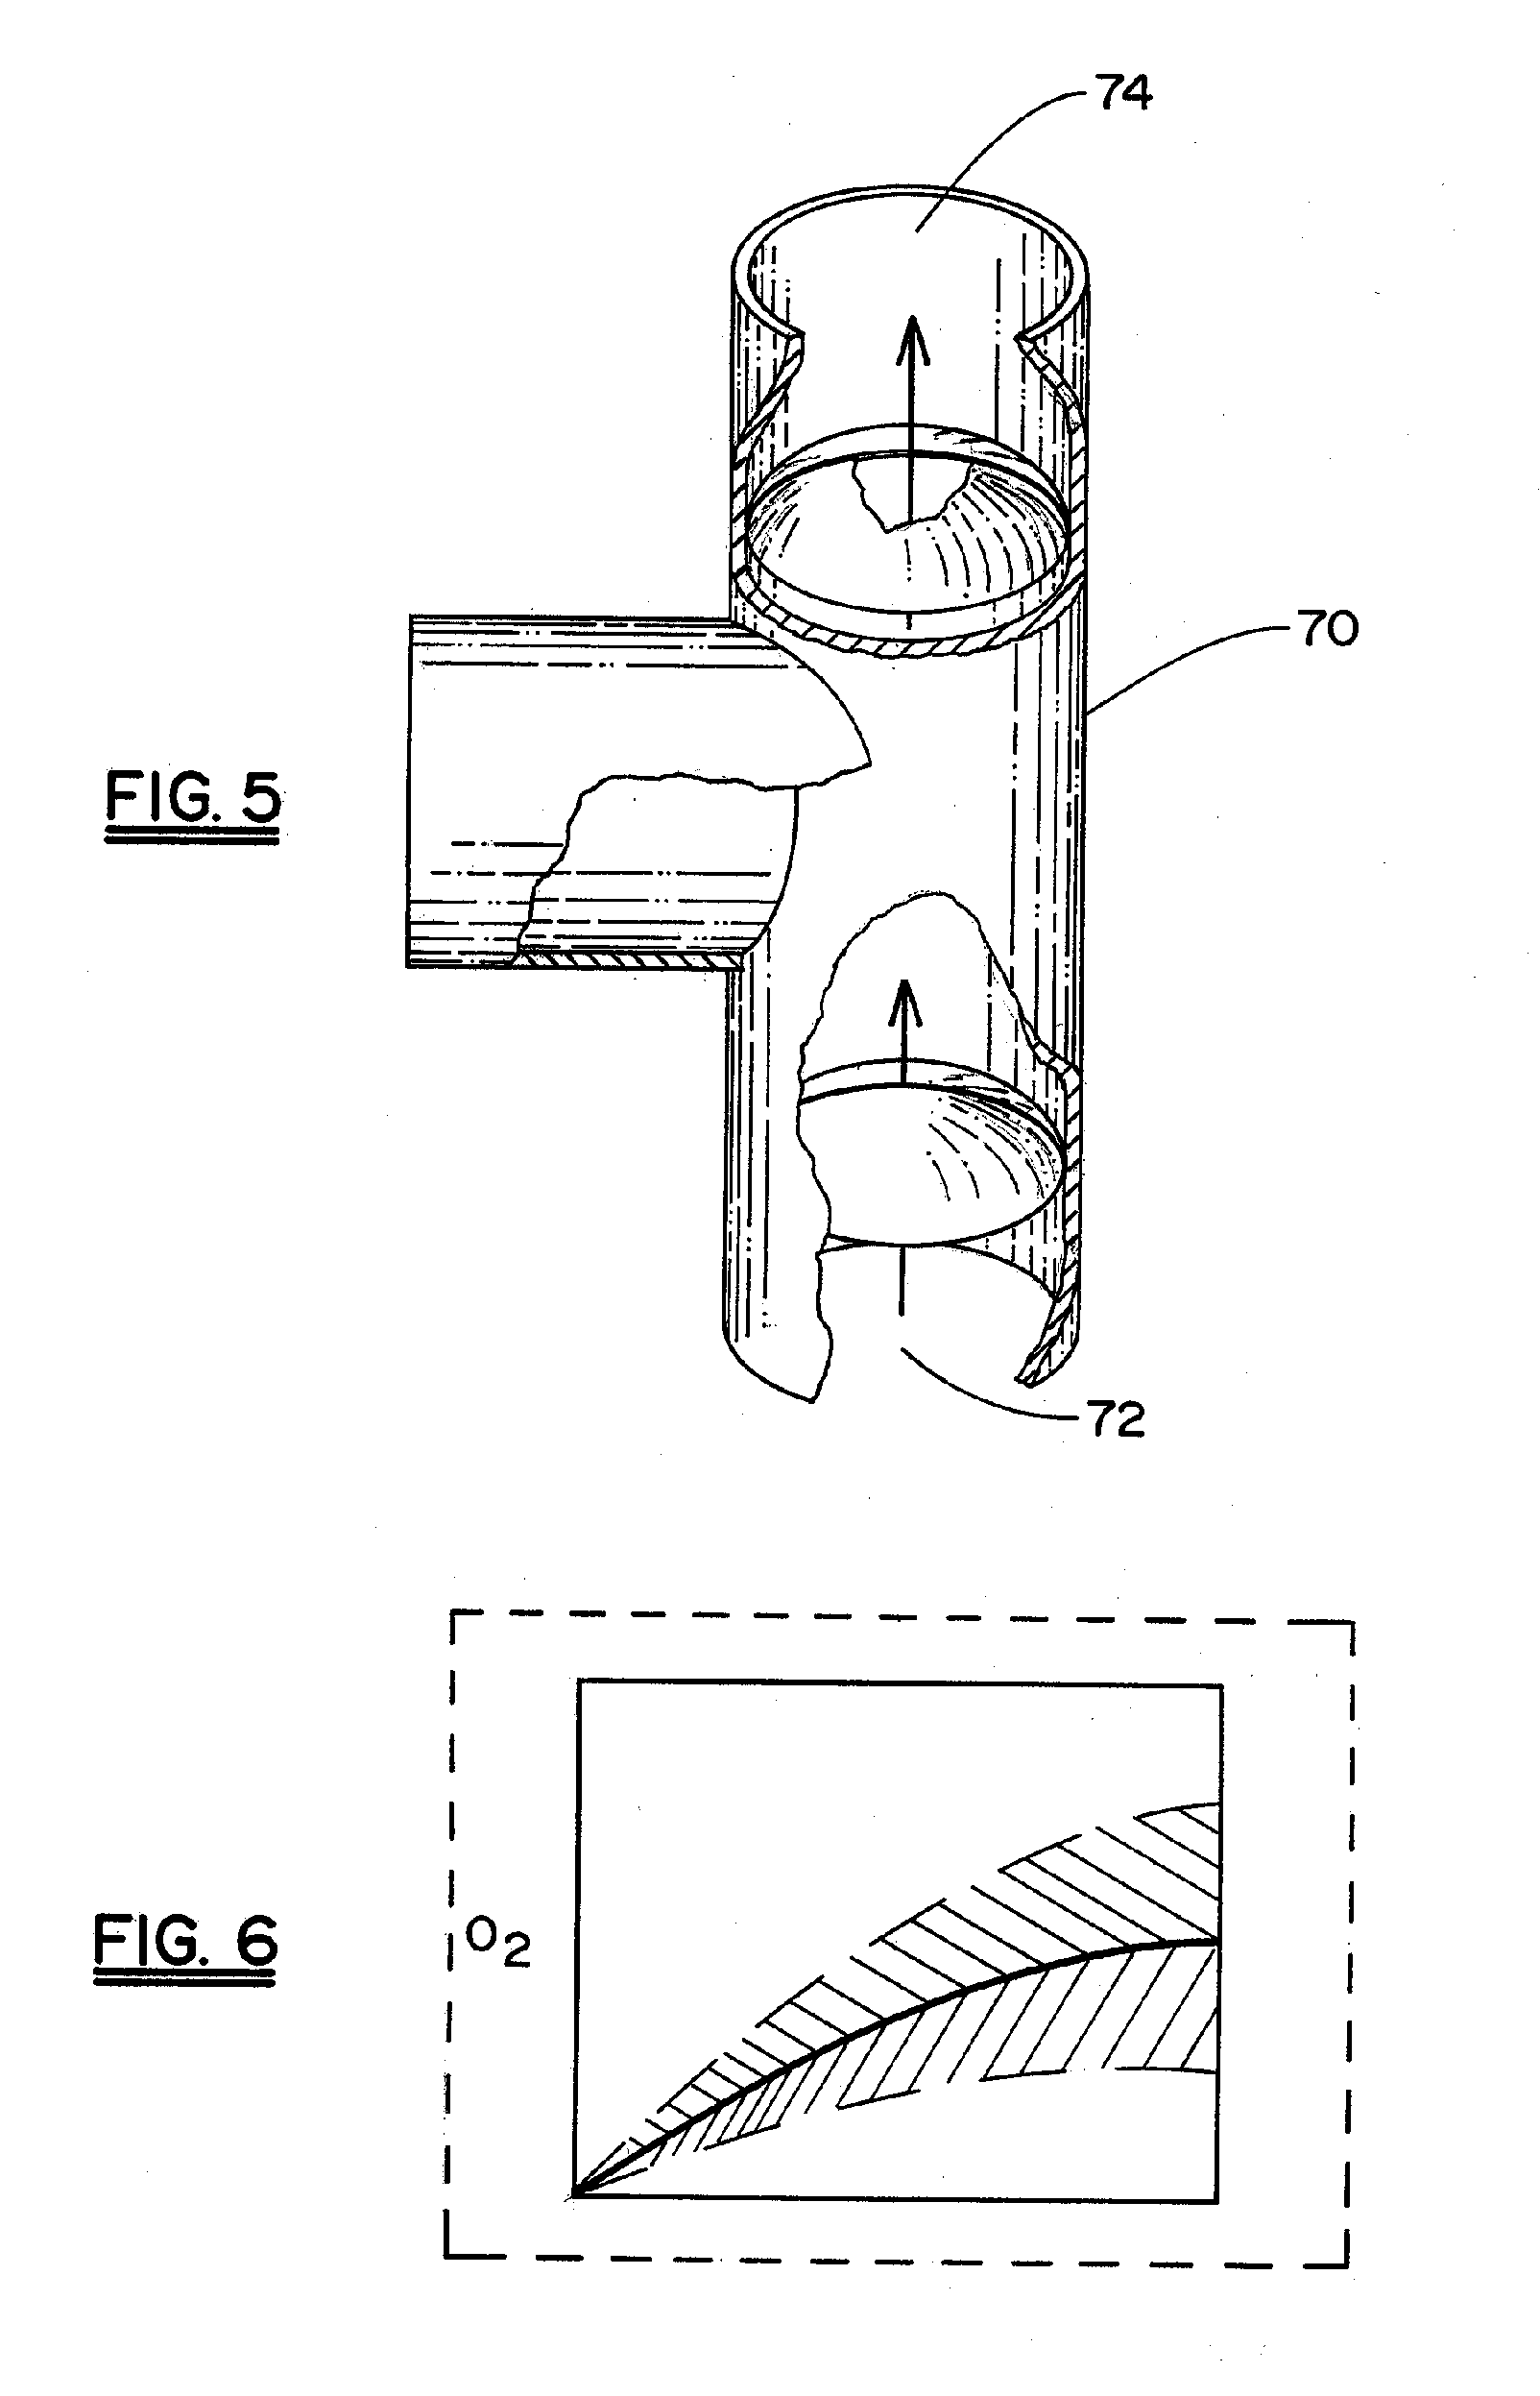 Non-Invasive Device and Method for Measuring the Cardiac Output of a Patient